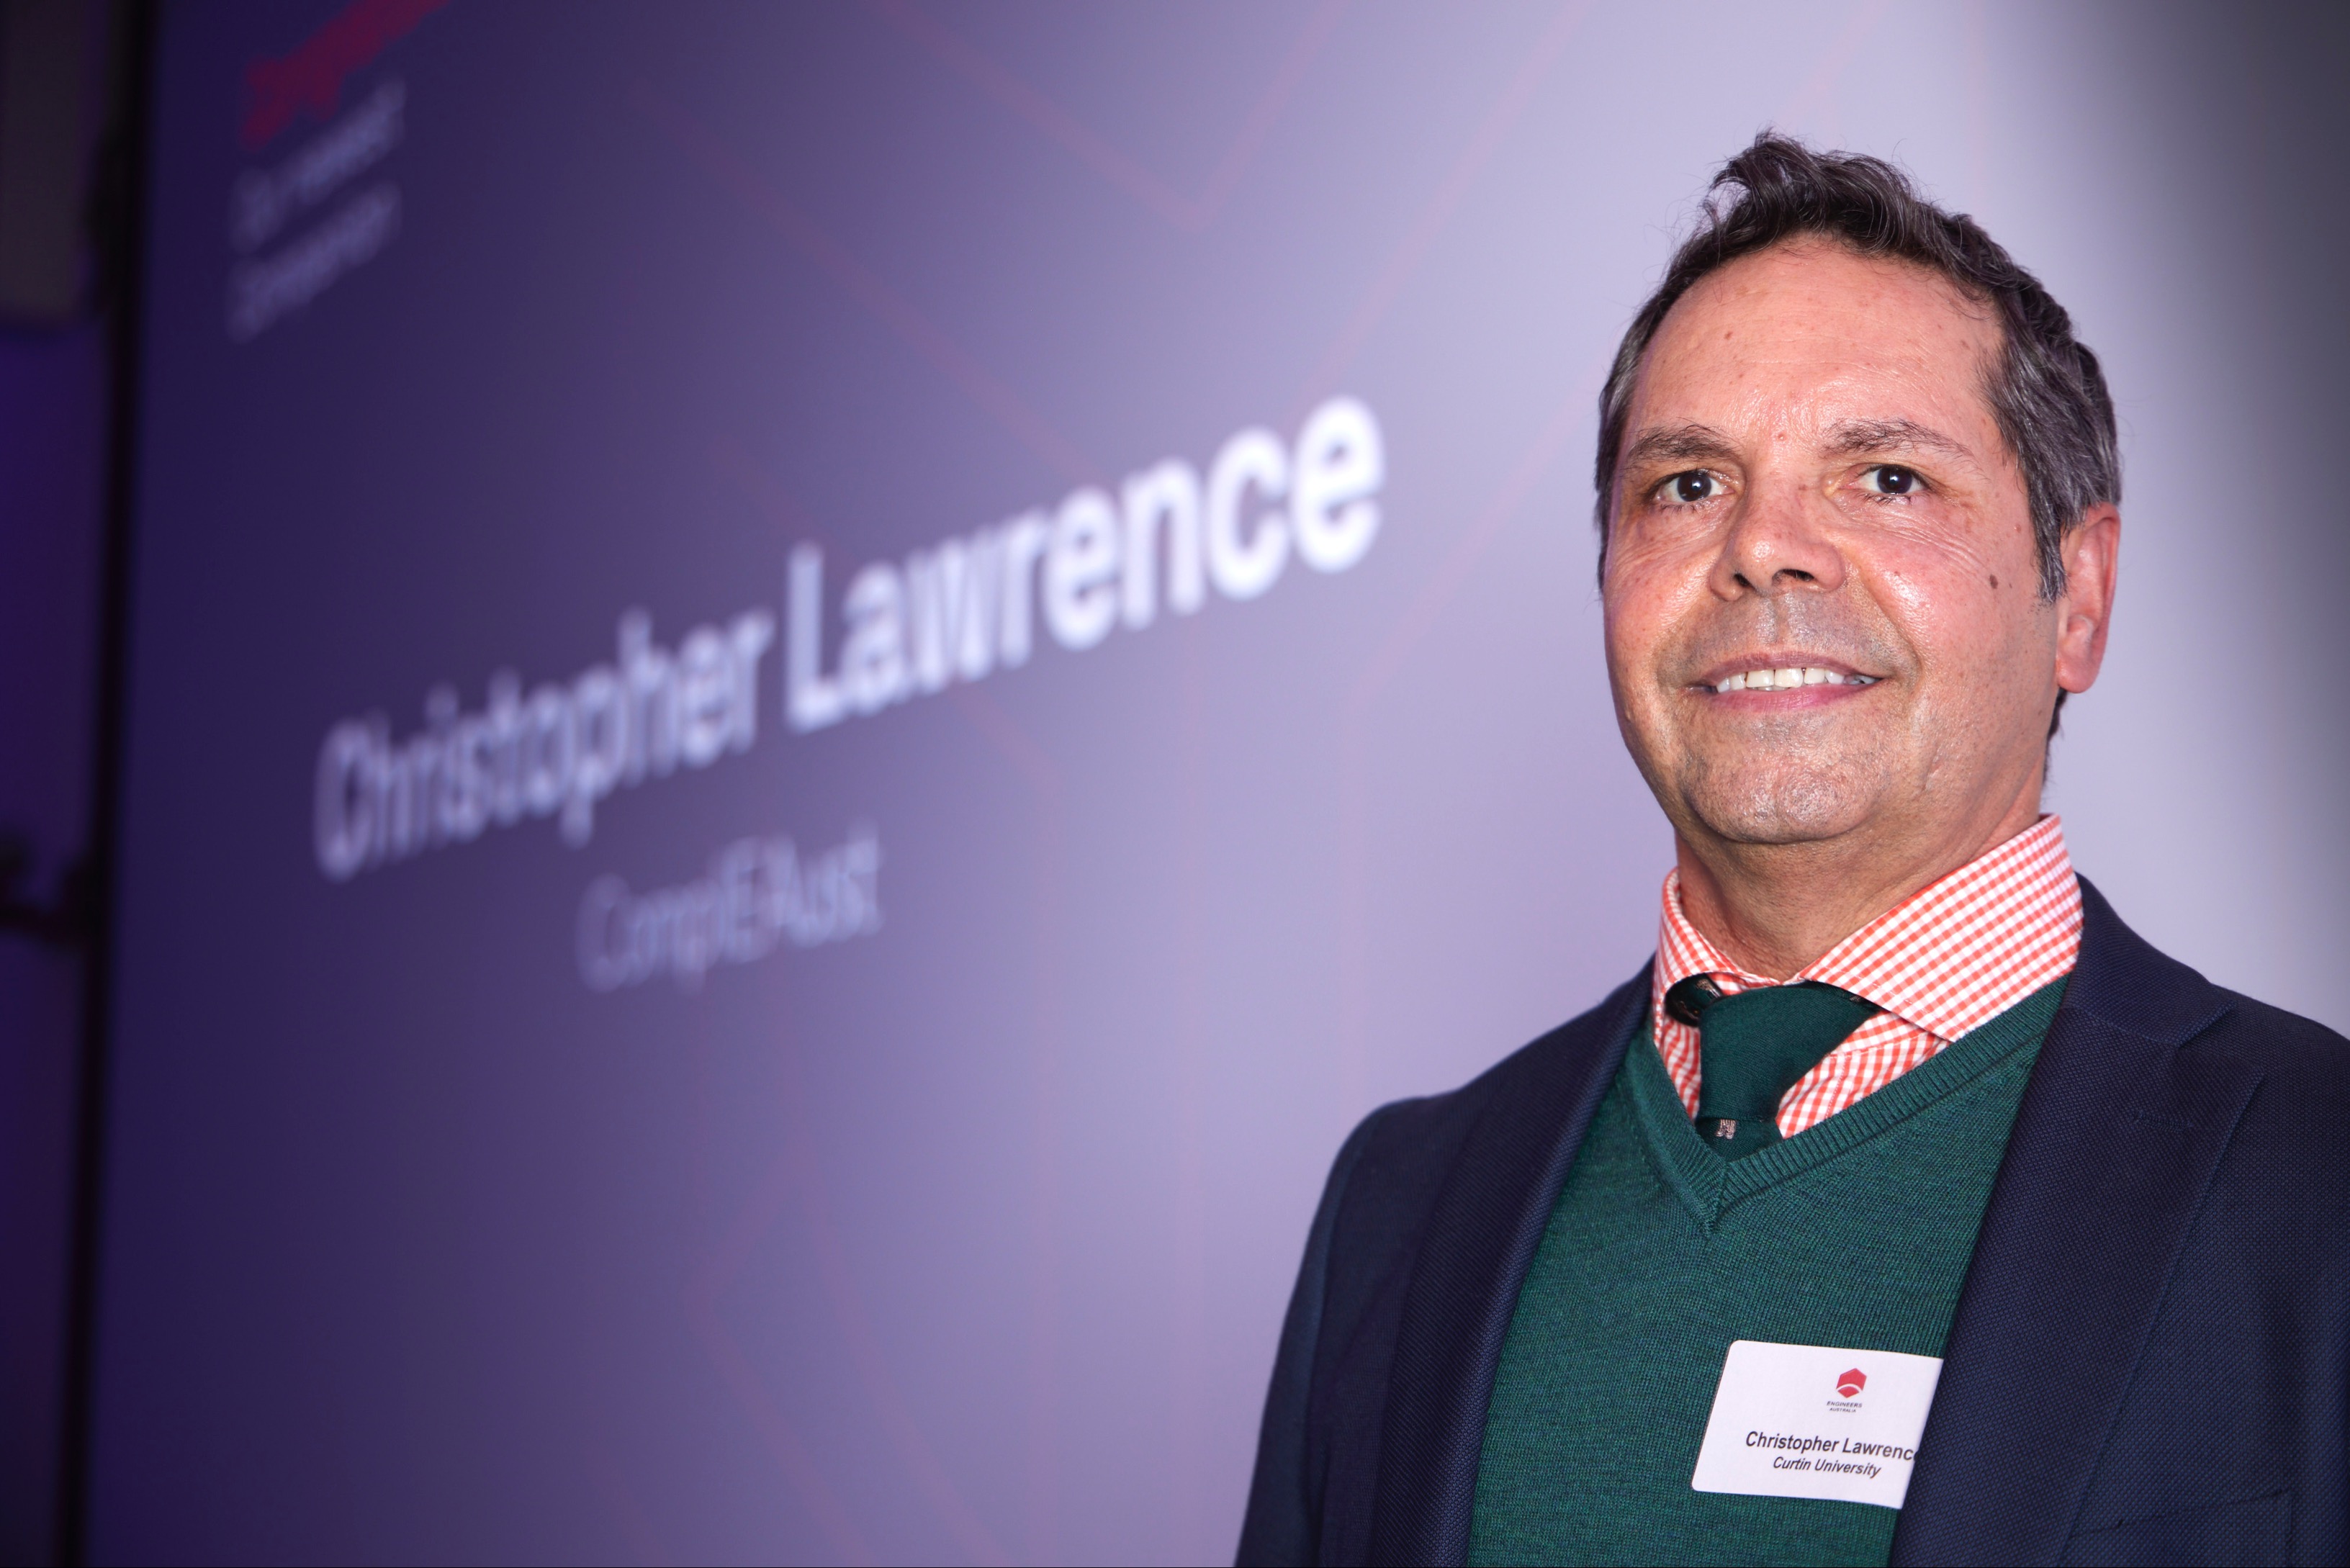 Christopher Lawrence in front of purple background